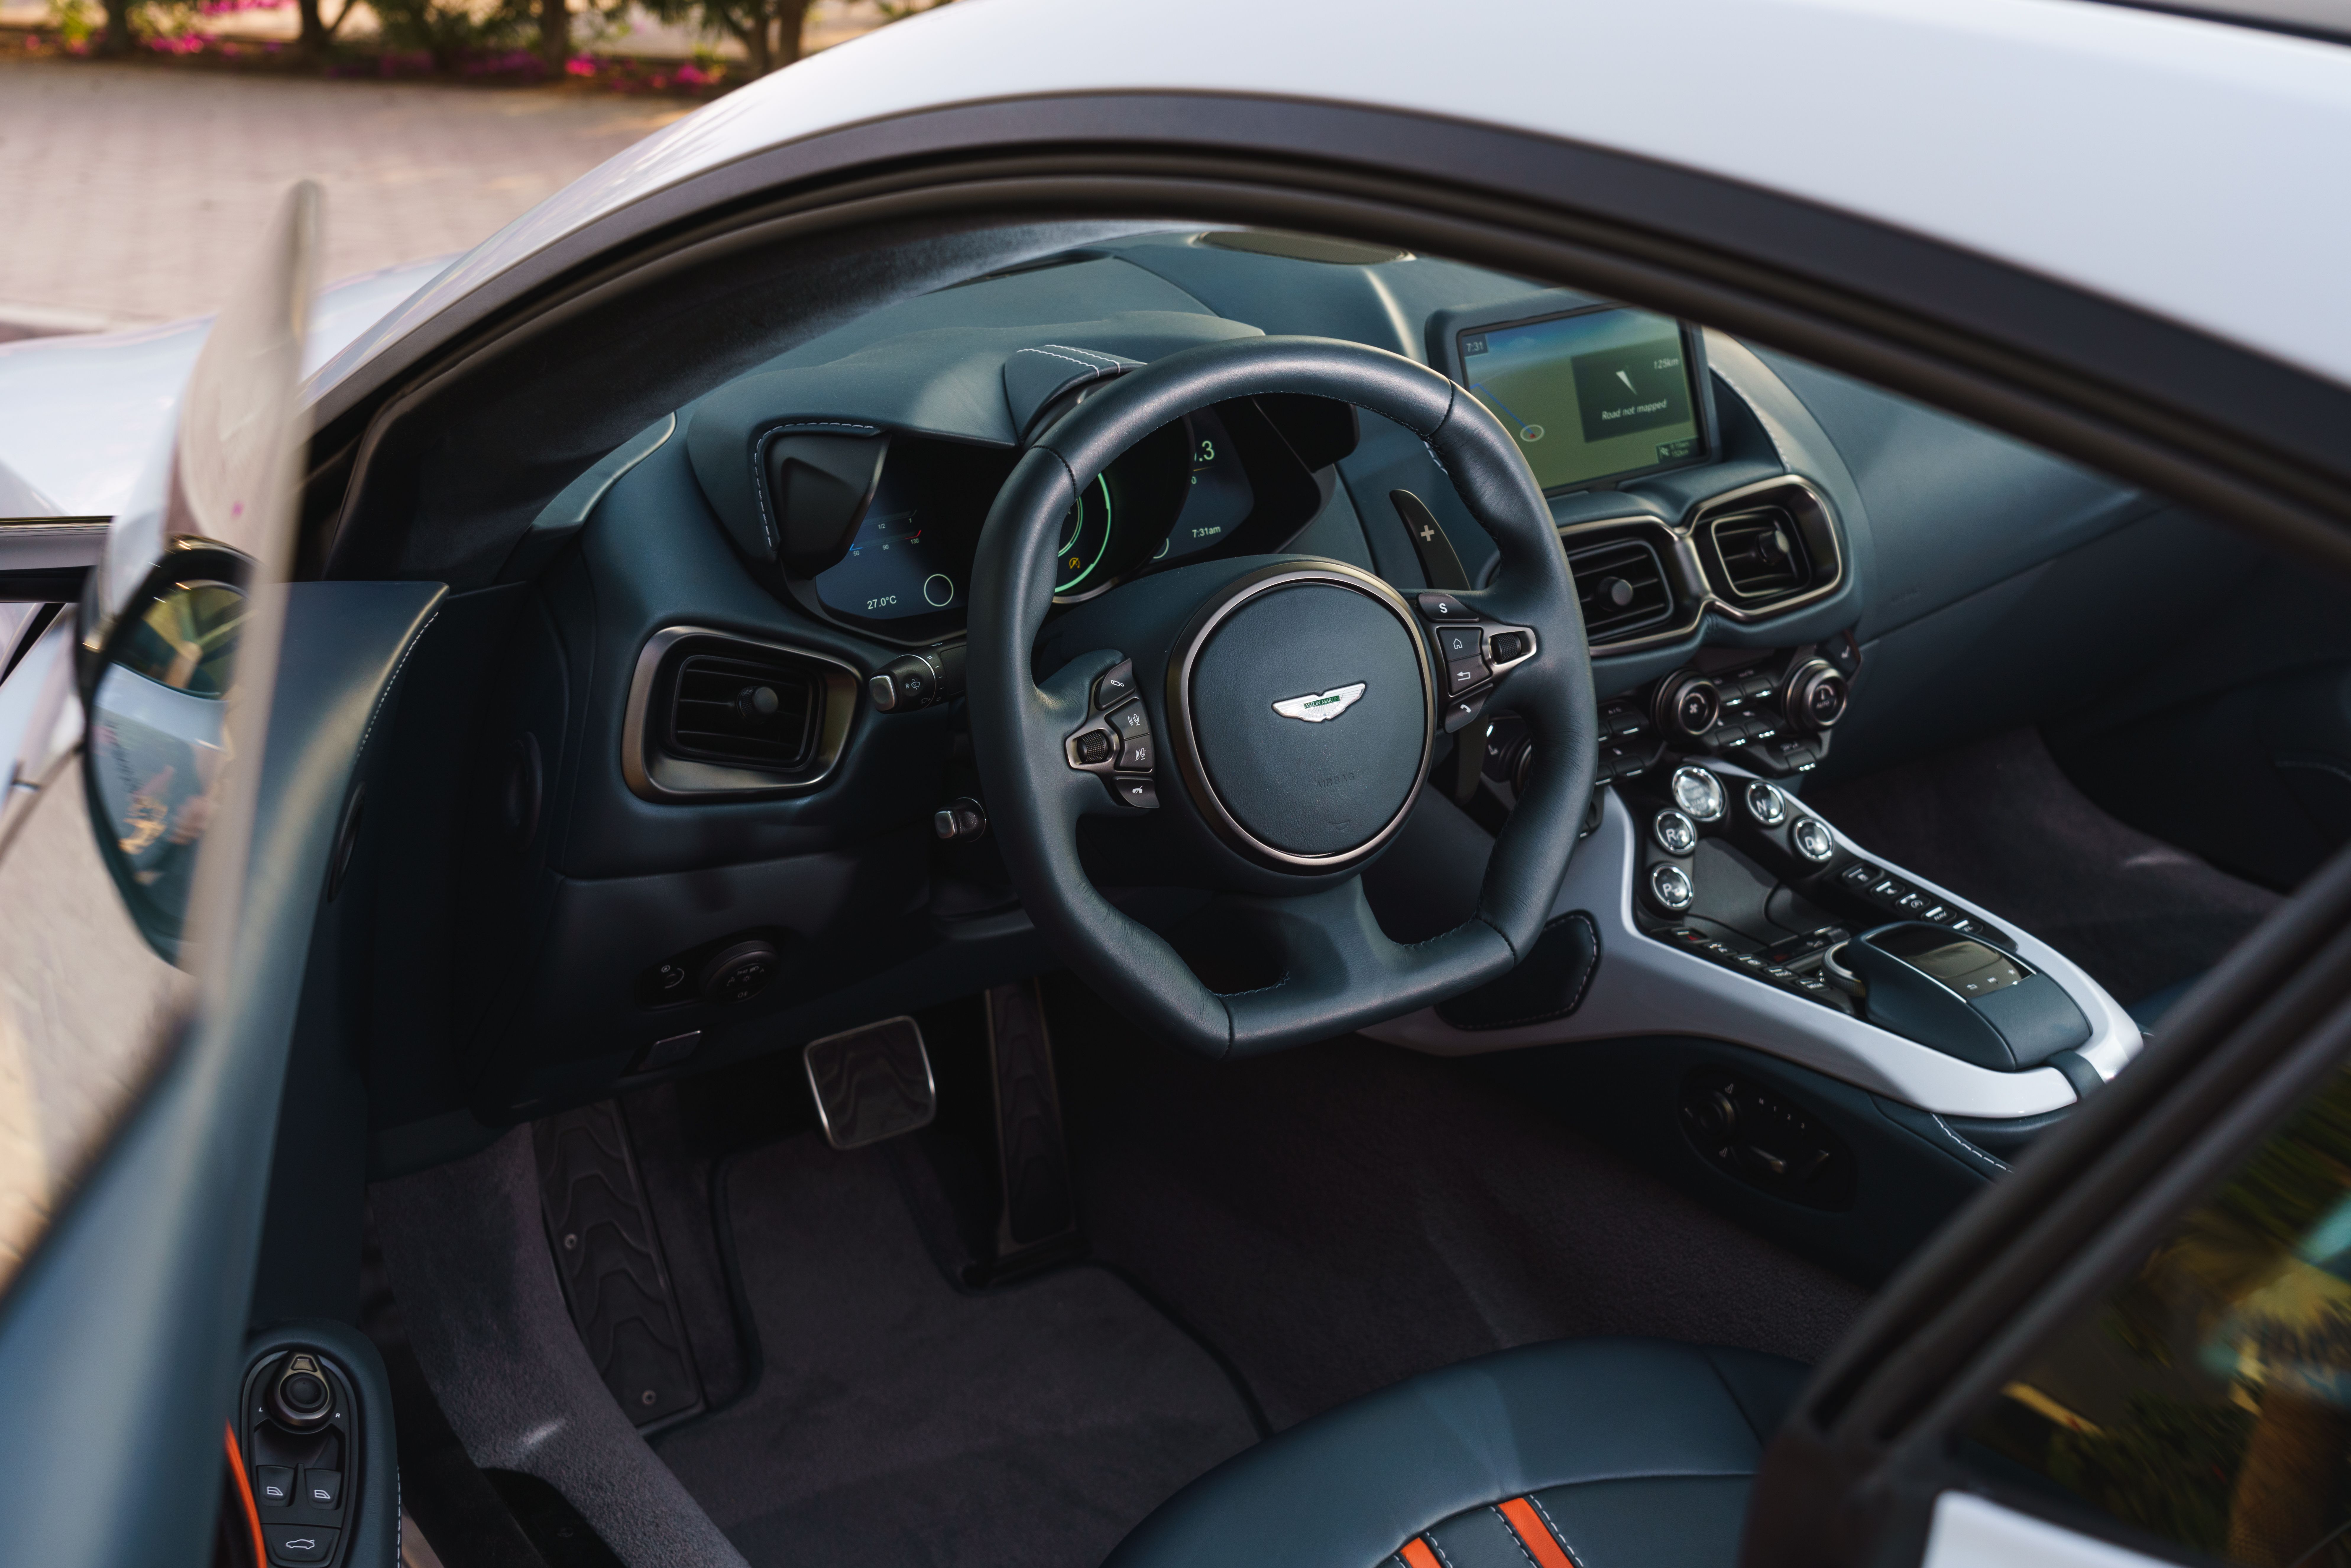 The interior of the Vantage Coupe from the driver's side